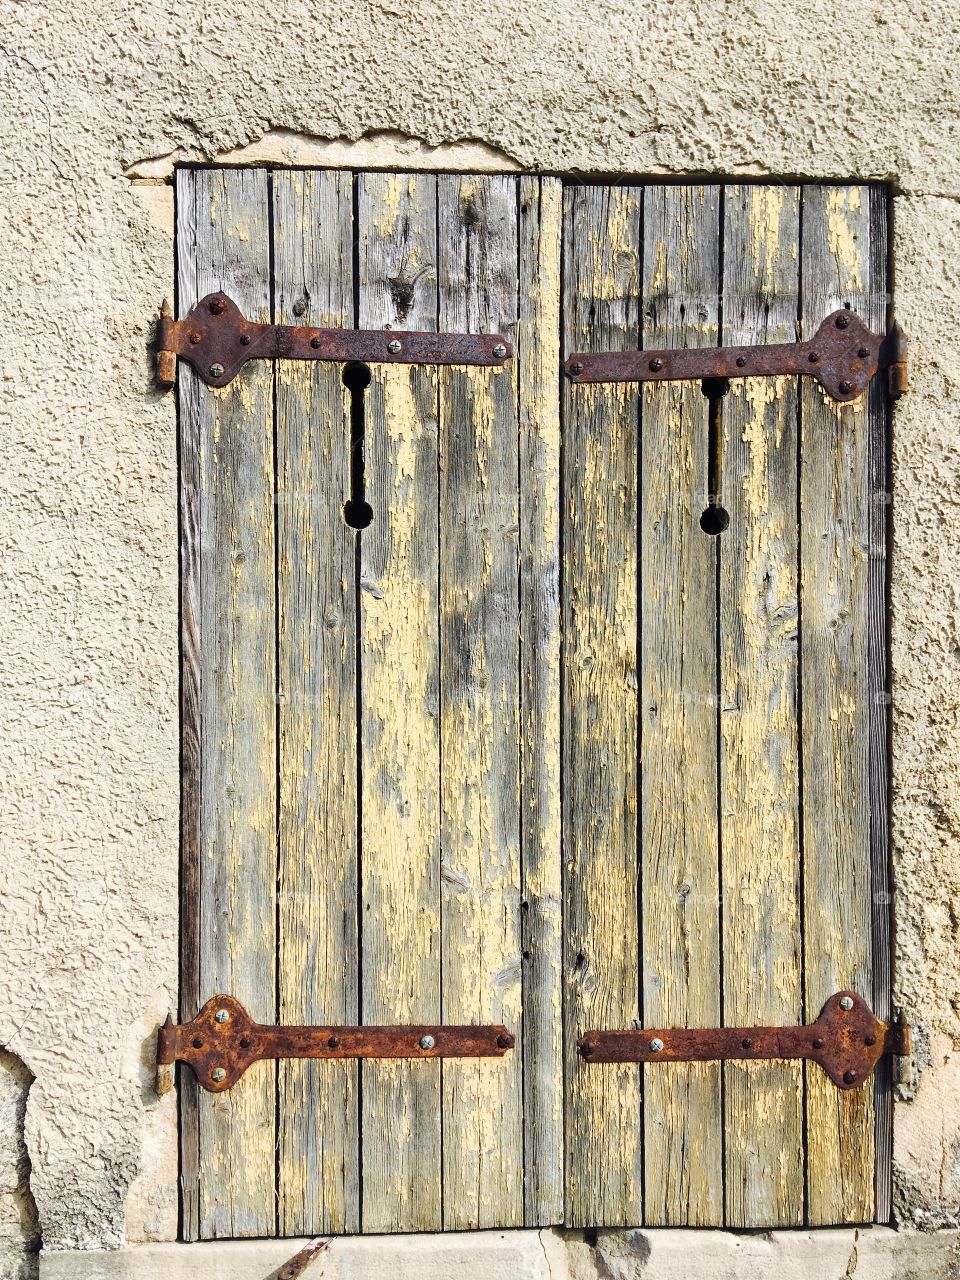 Door discovery on country walk in France 